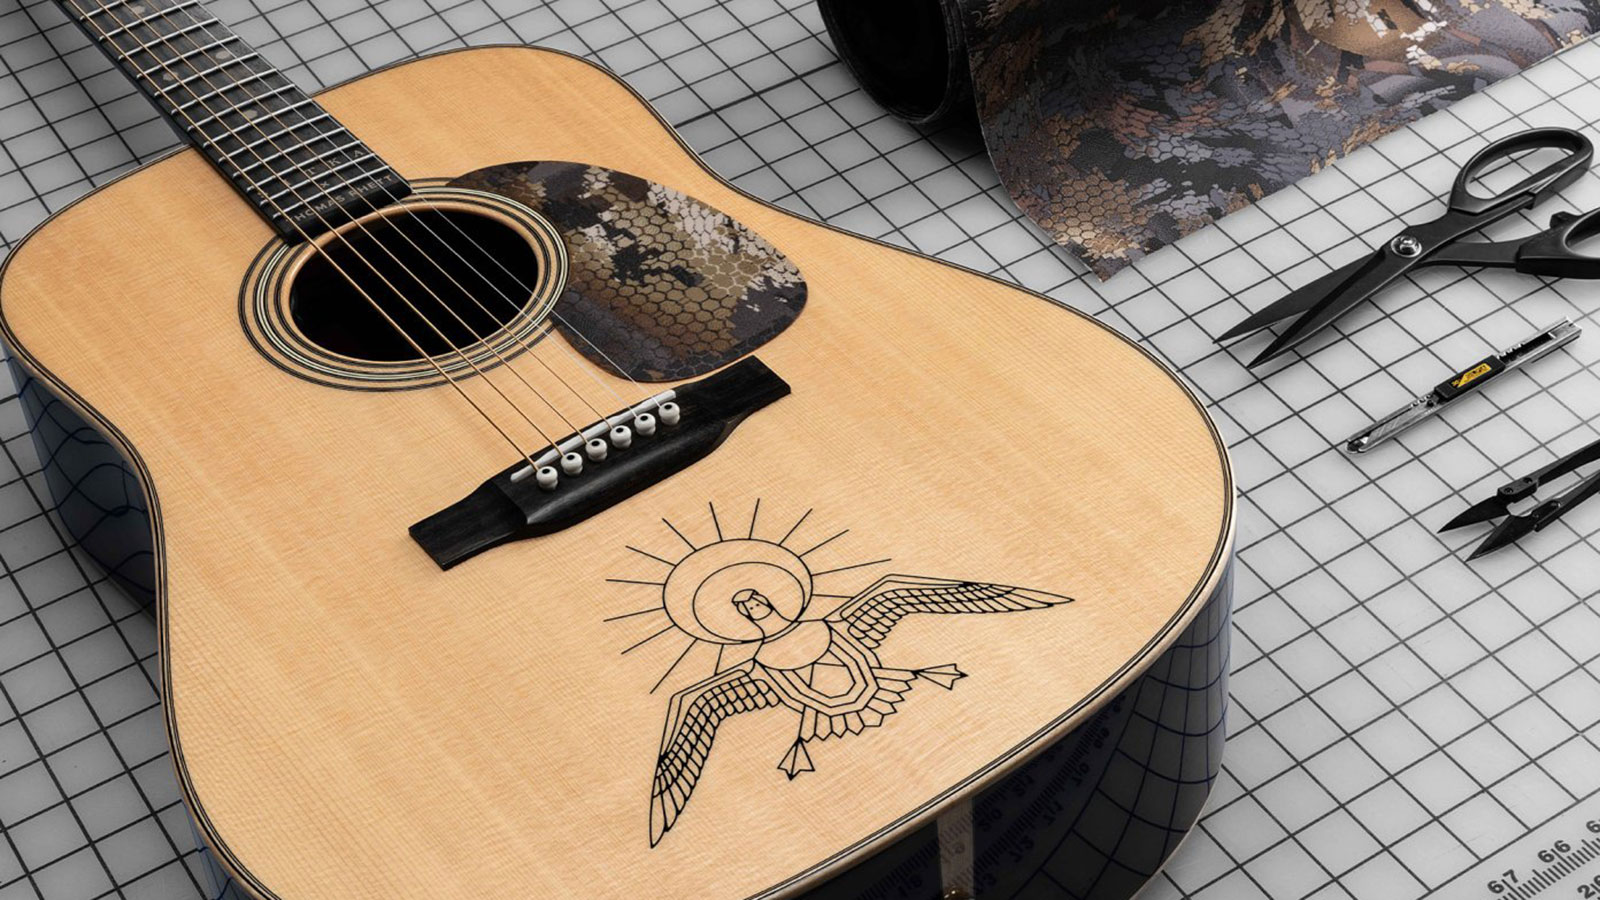 Mighty duck! Sitka has teamed up with Martin and Thomas Rhett to auction this custom HD-28